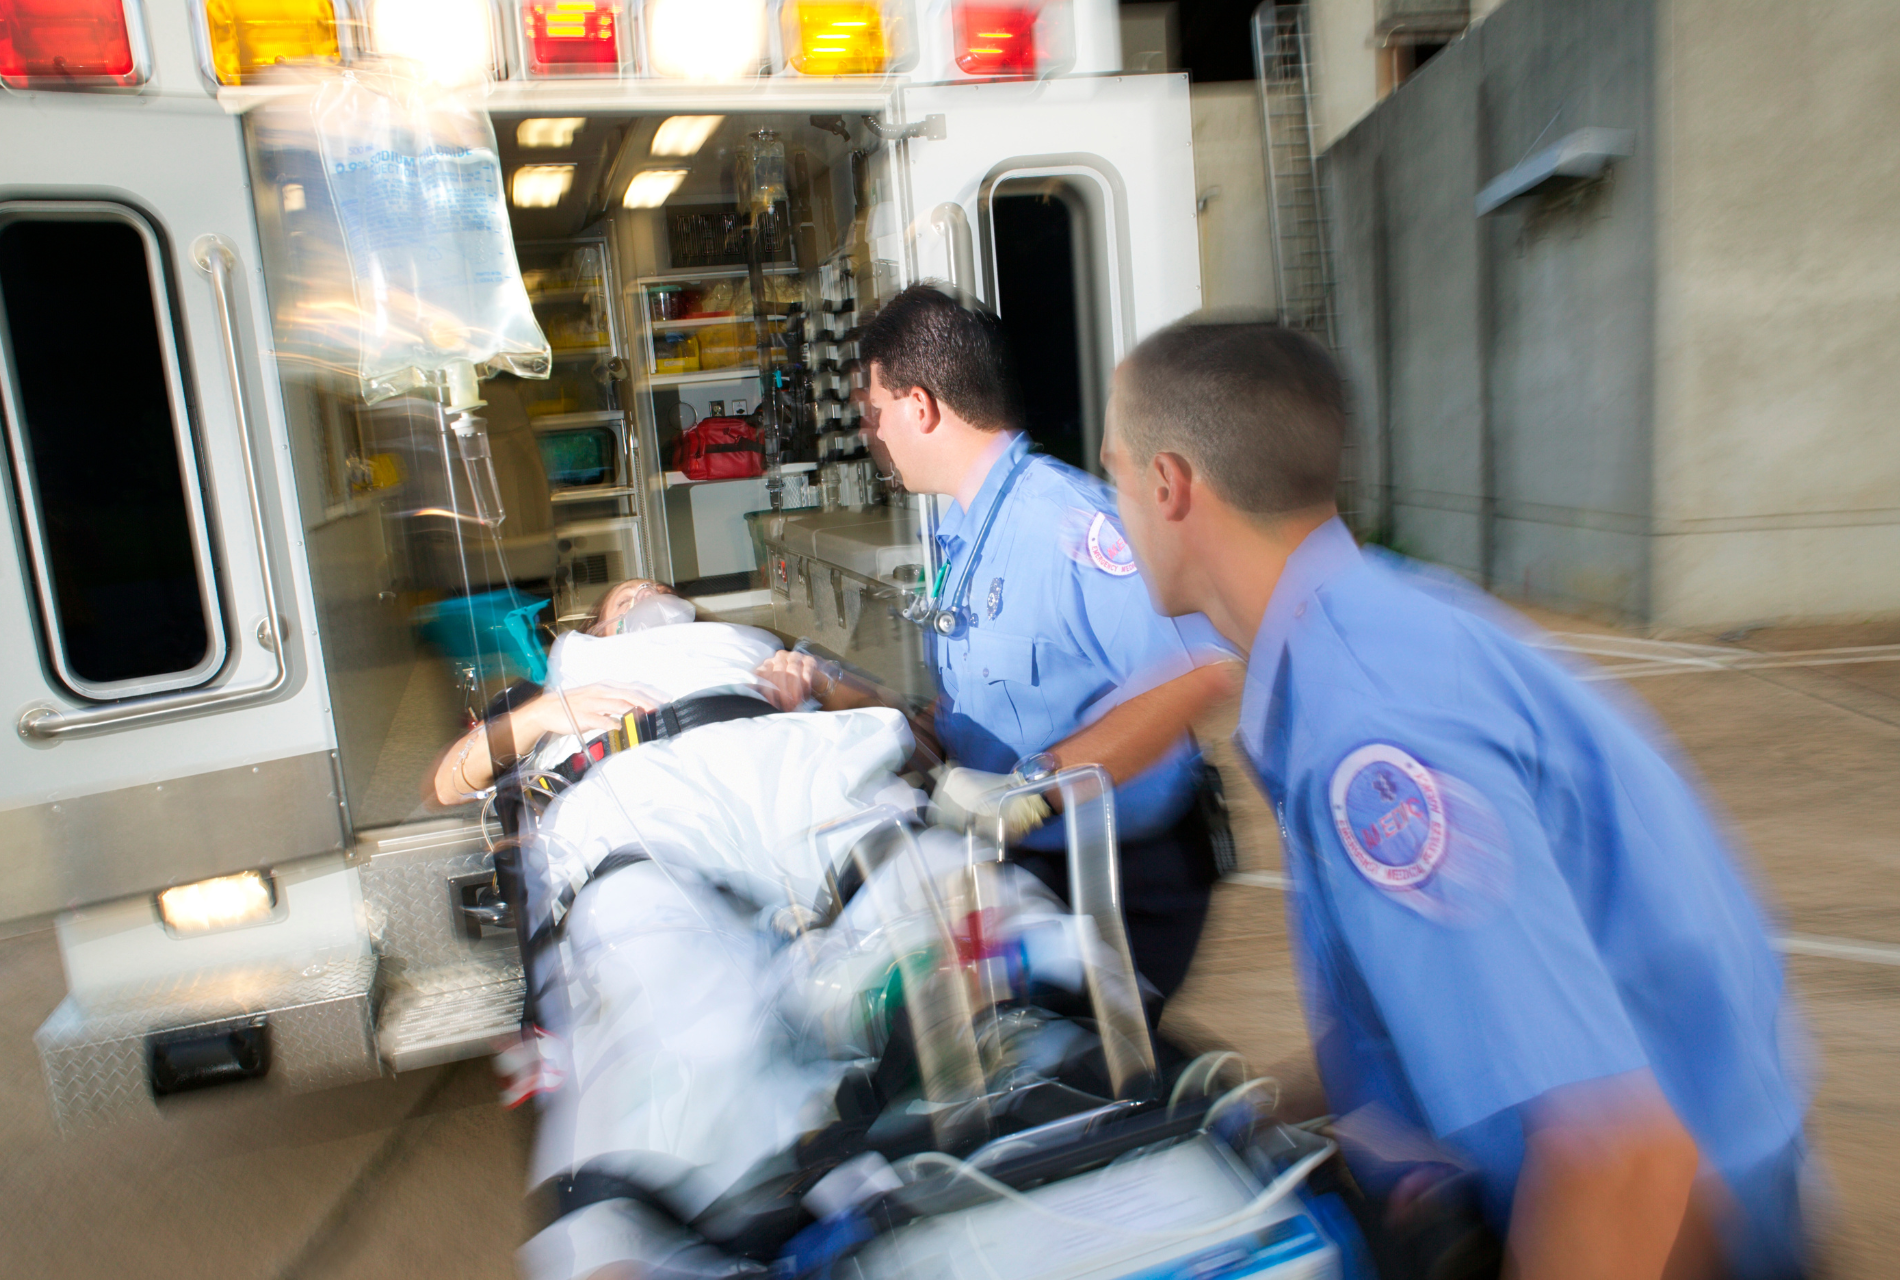 What’s Next How EMS Can Survive the Economic Downturn - Fitch & Associates